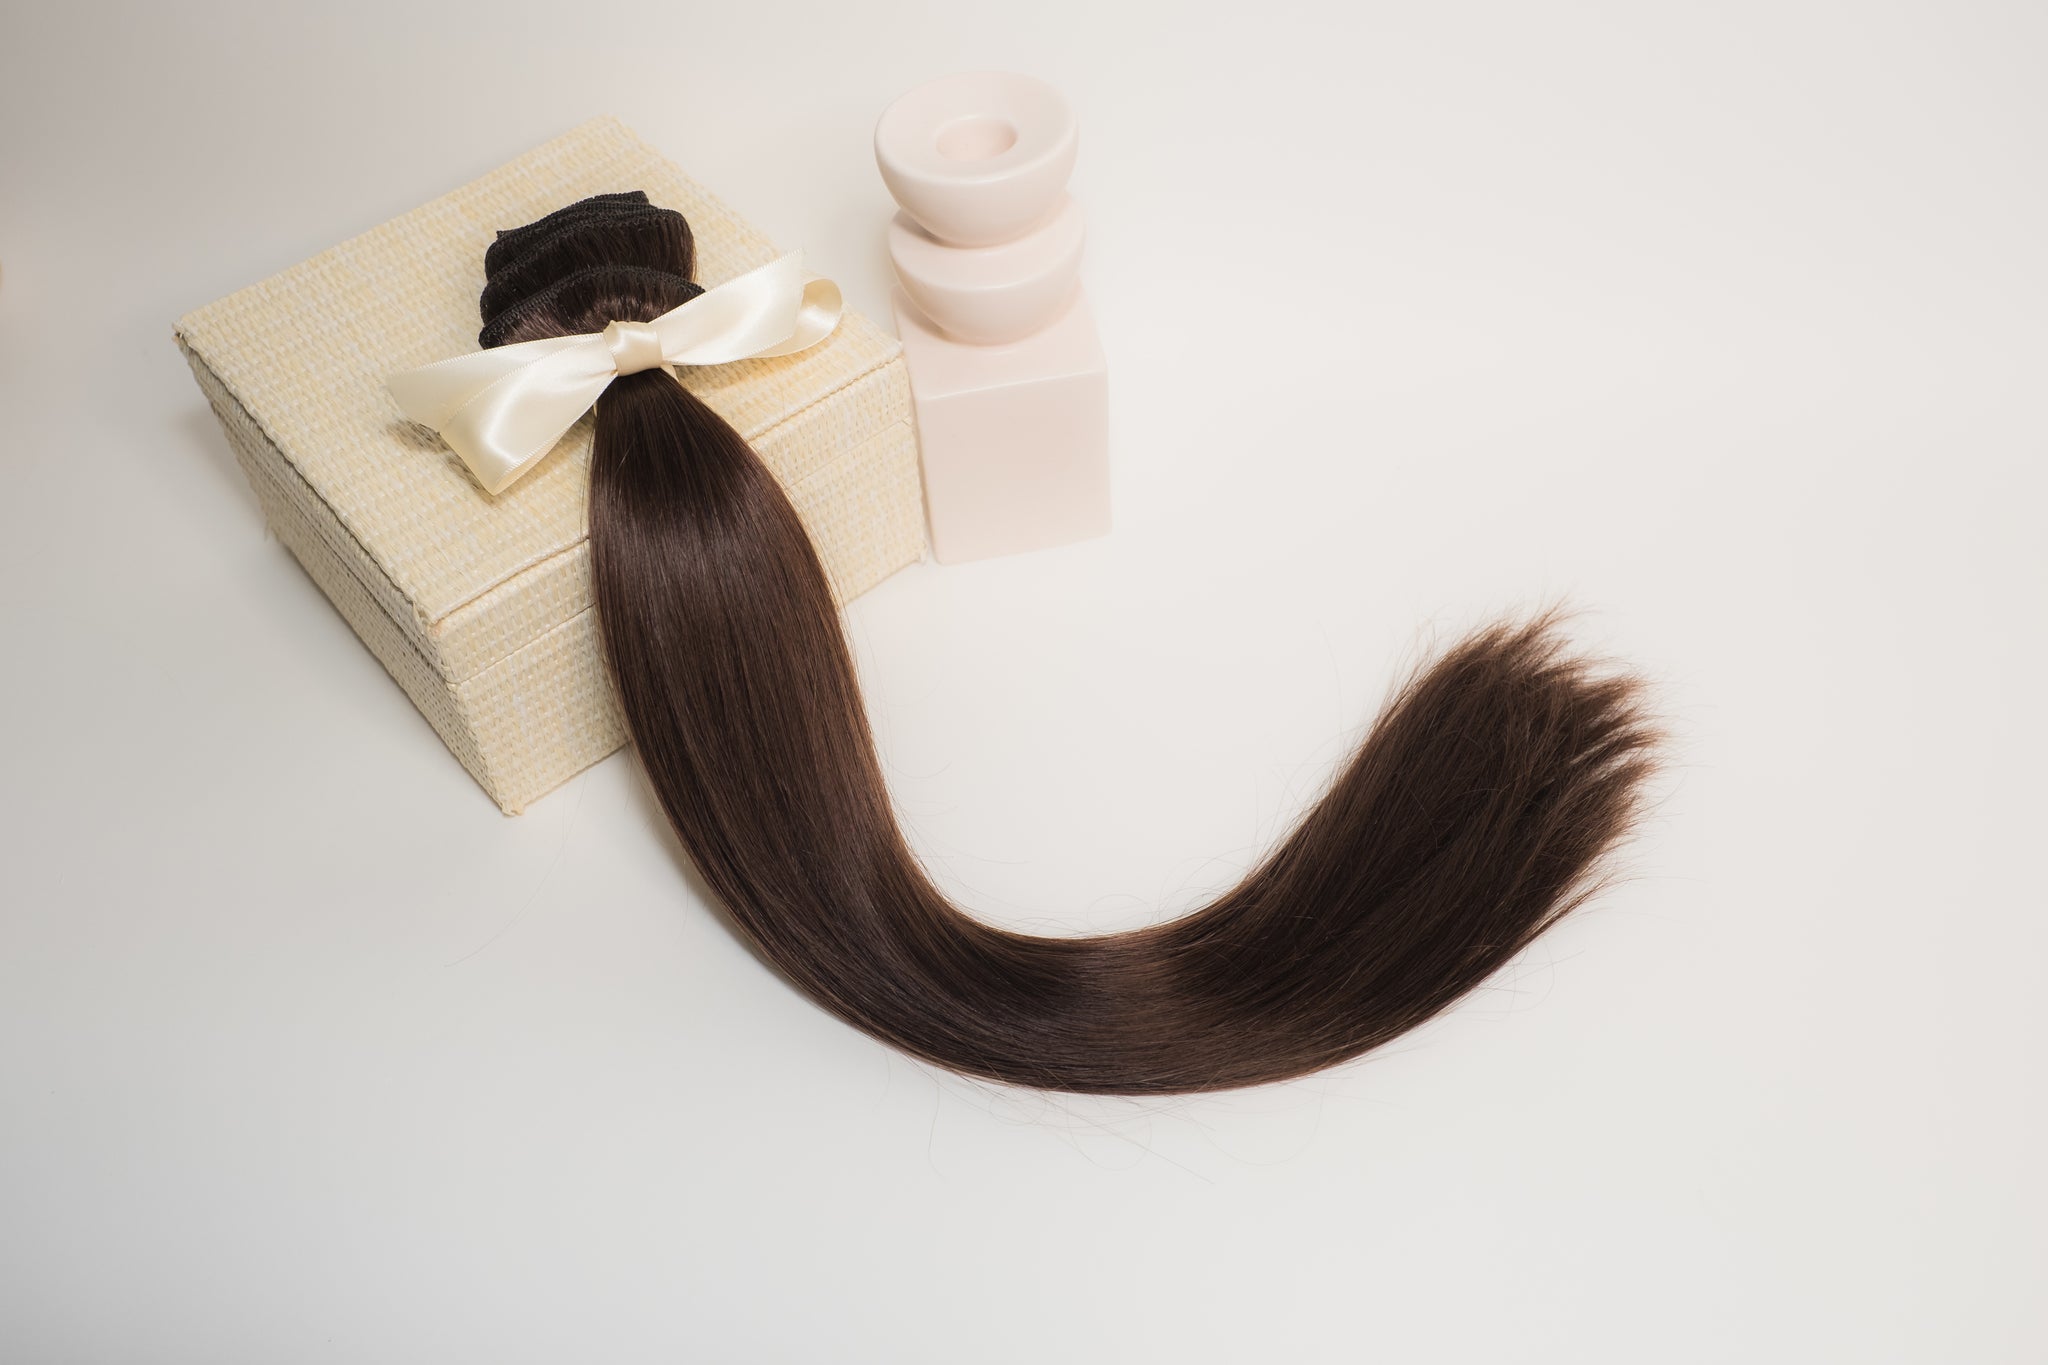 18" Clip In Hair Extensions Deluxe Box ($339.00 - $359.00)